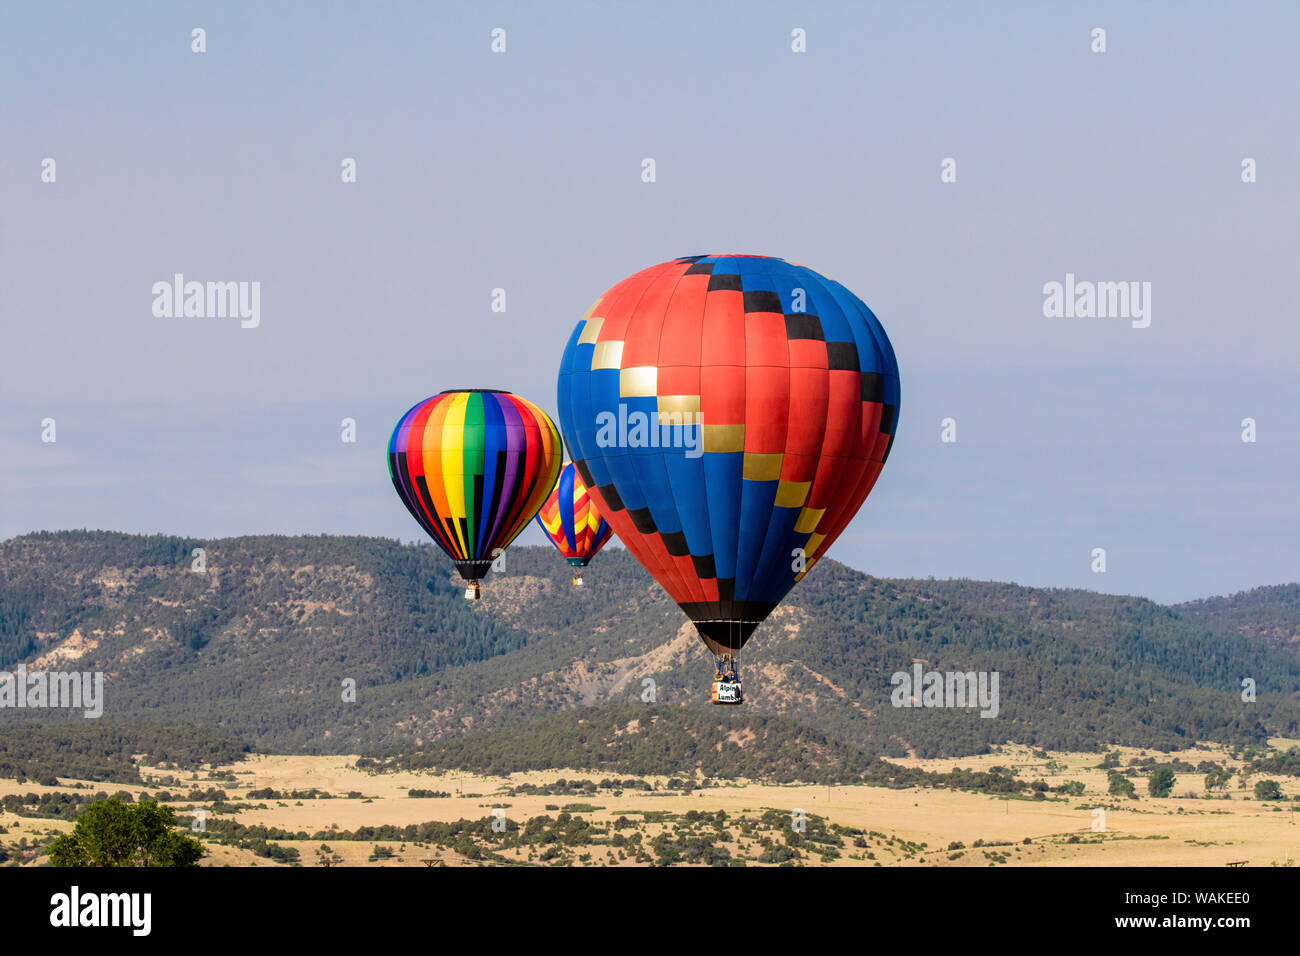 Hot air balloon bringing color to the sky. (Editorial Use Only) Stock Photo